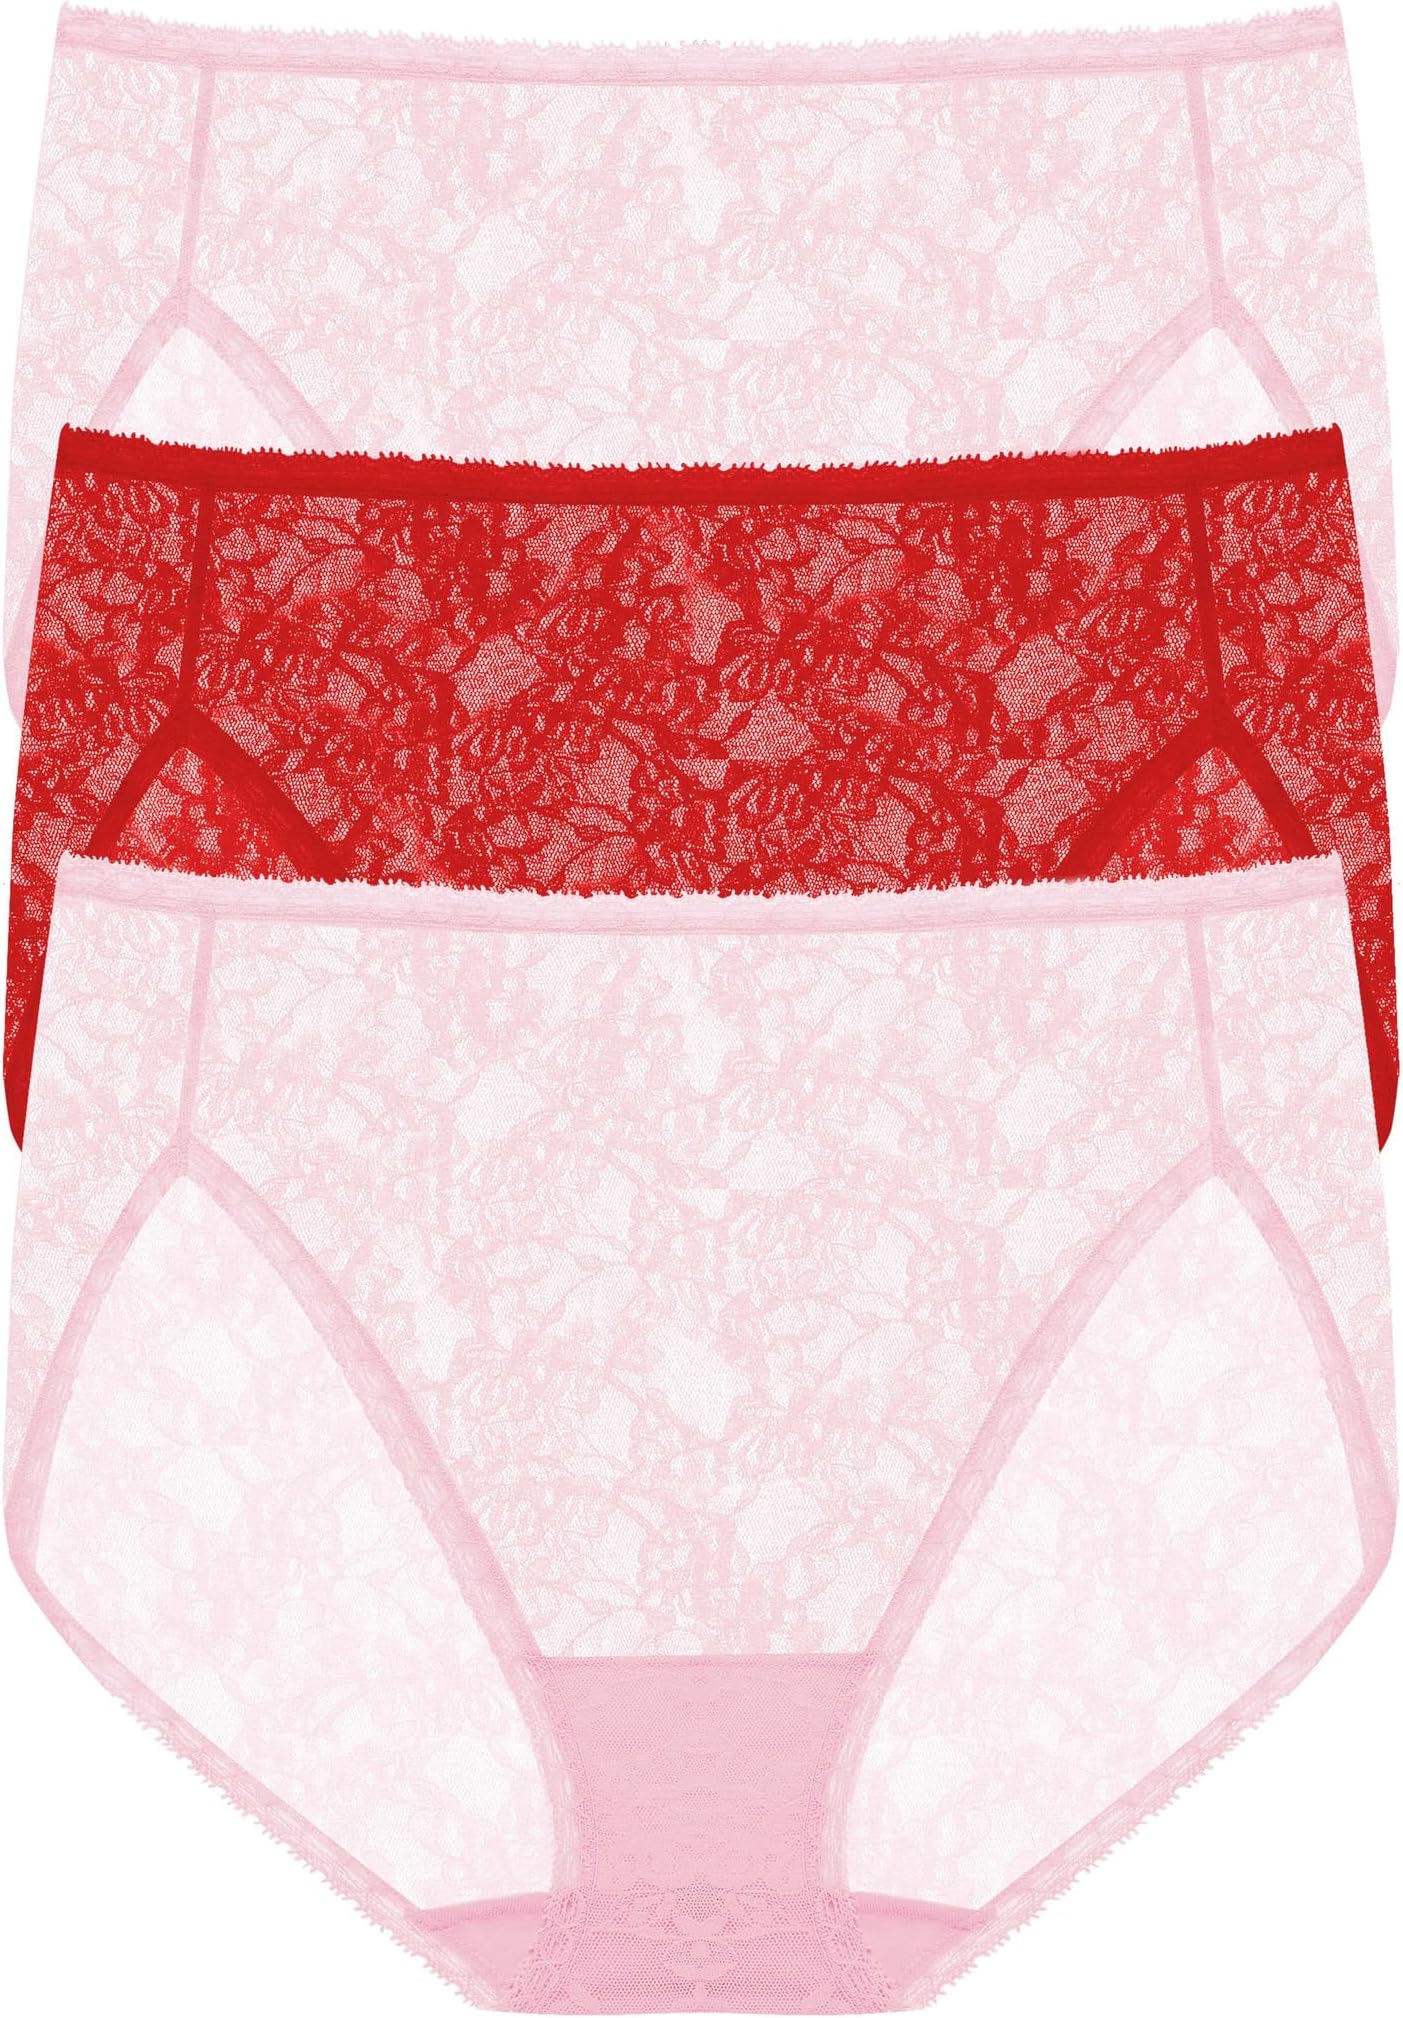 Blisss Allure French Cut, 3 шт. Natori, цвет Pink Suede/Poinsettia/Pink Suede цена и фото